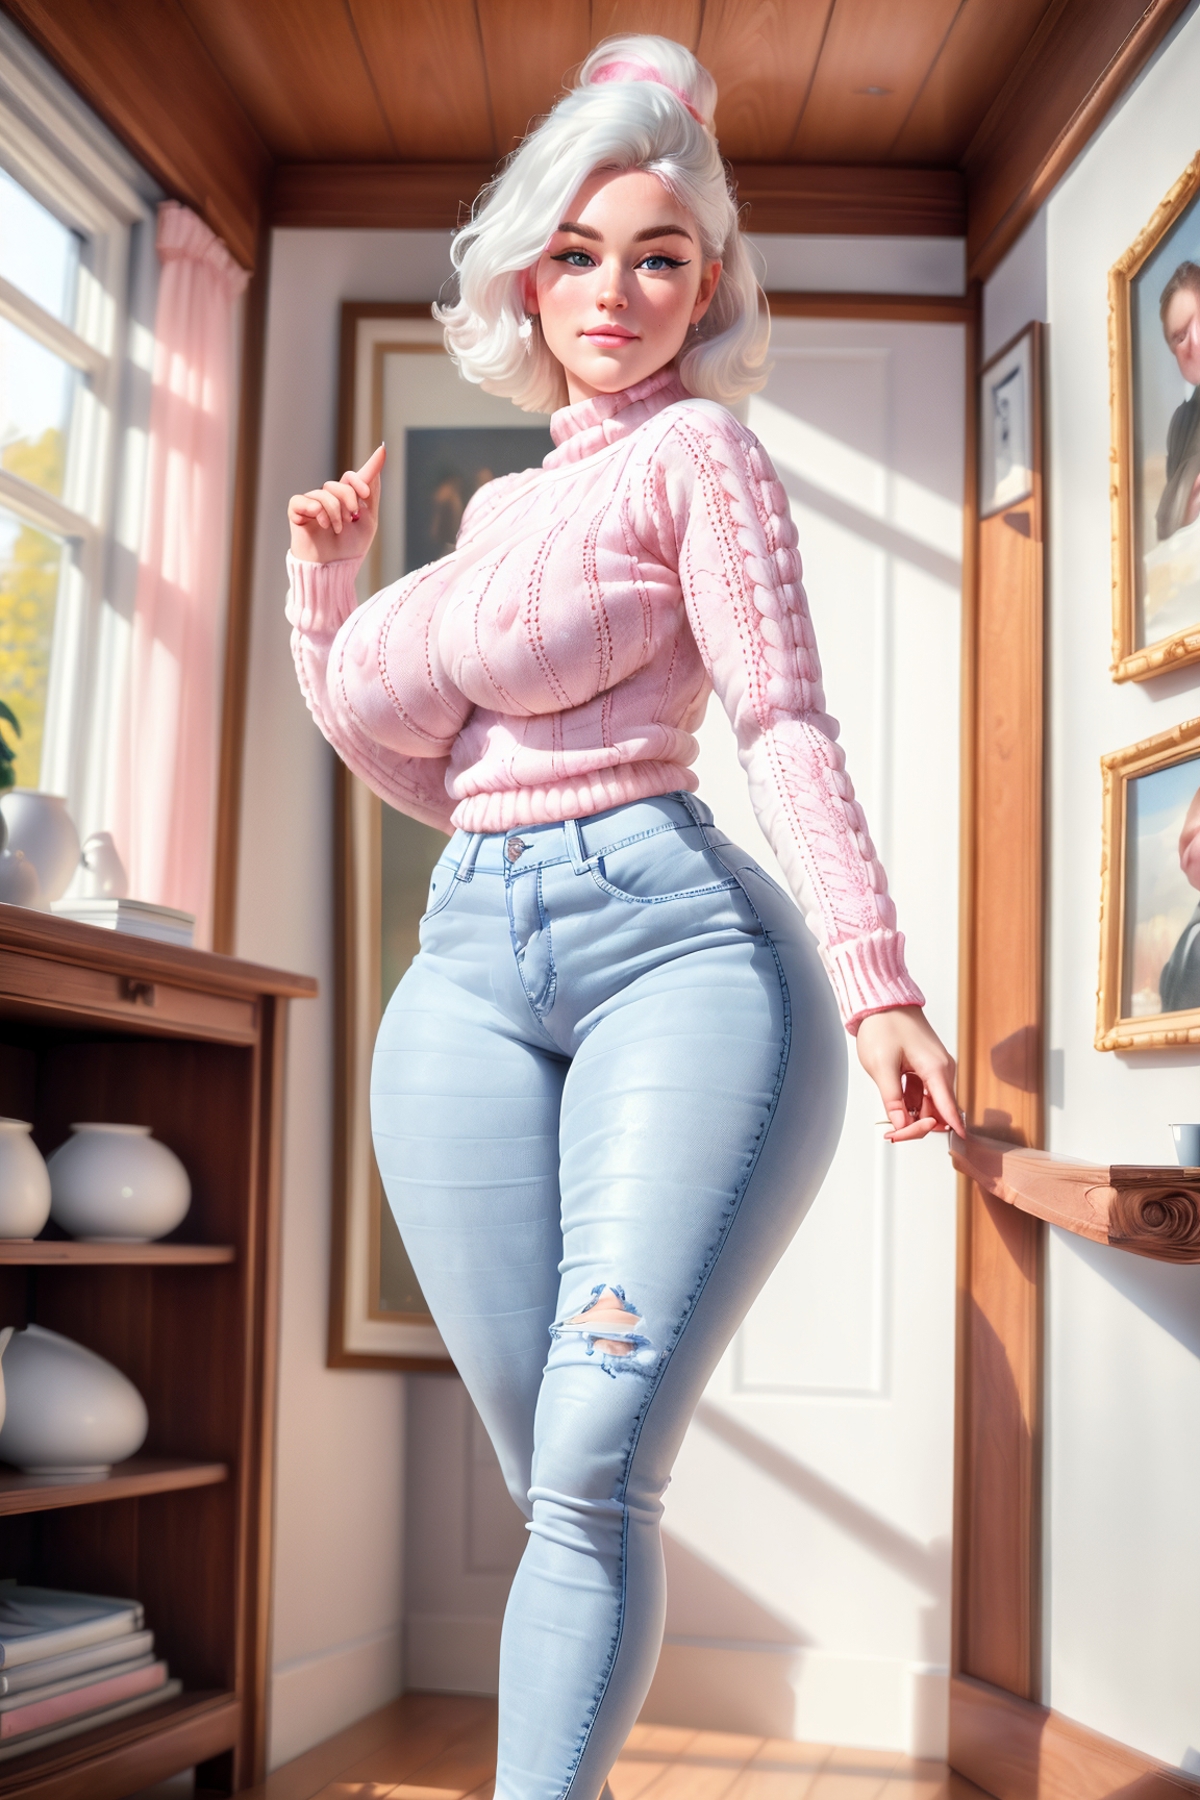 A computer-generated woman wearing blue jeans and a pink sweater poses in a room.